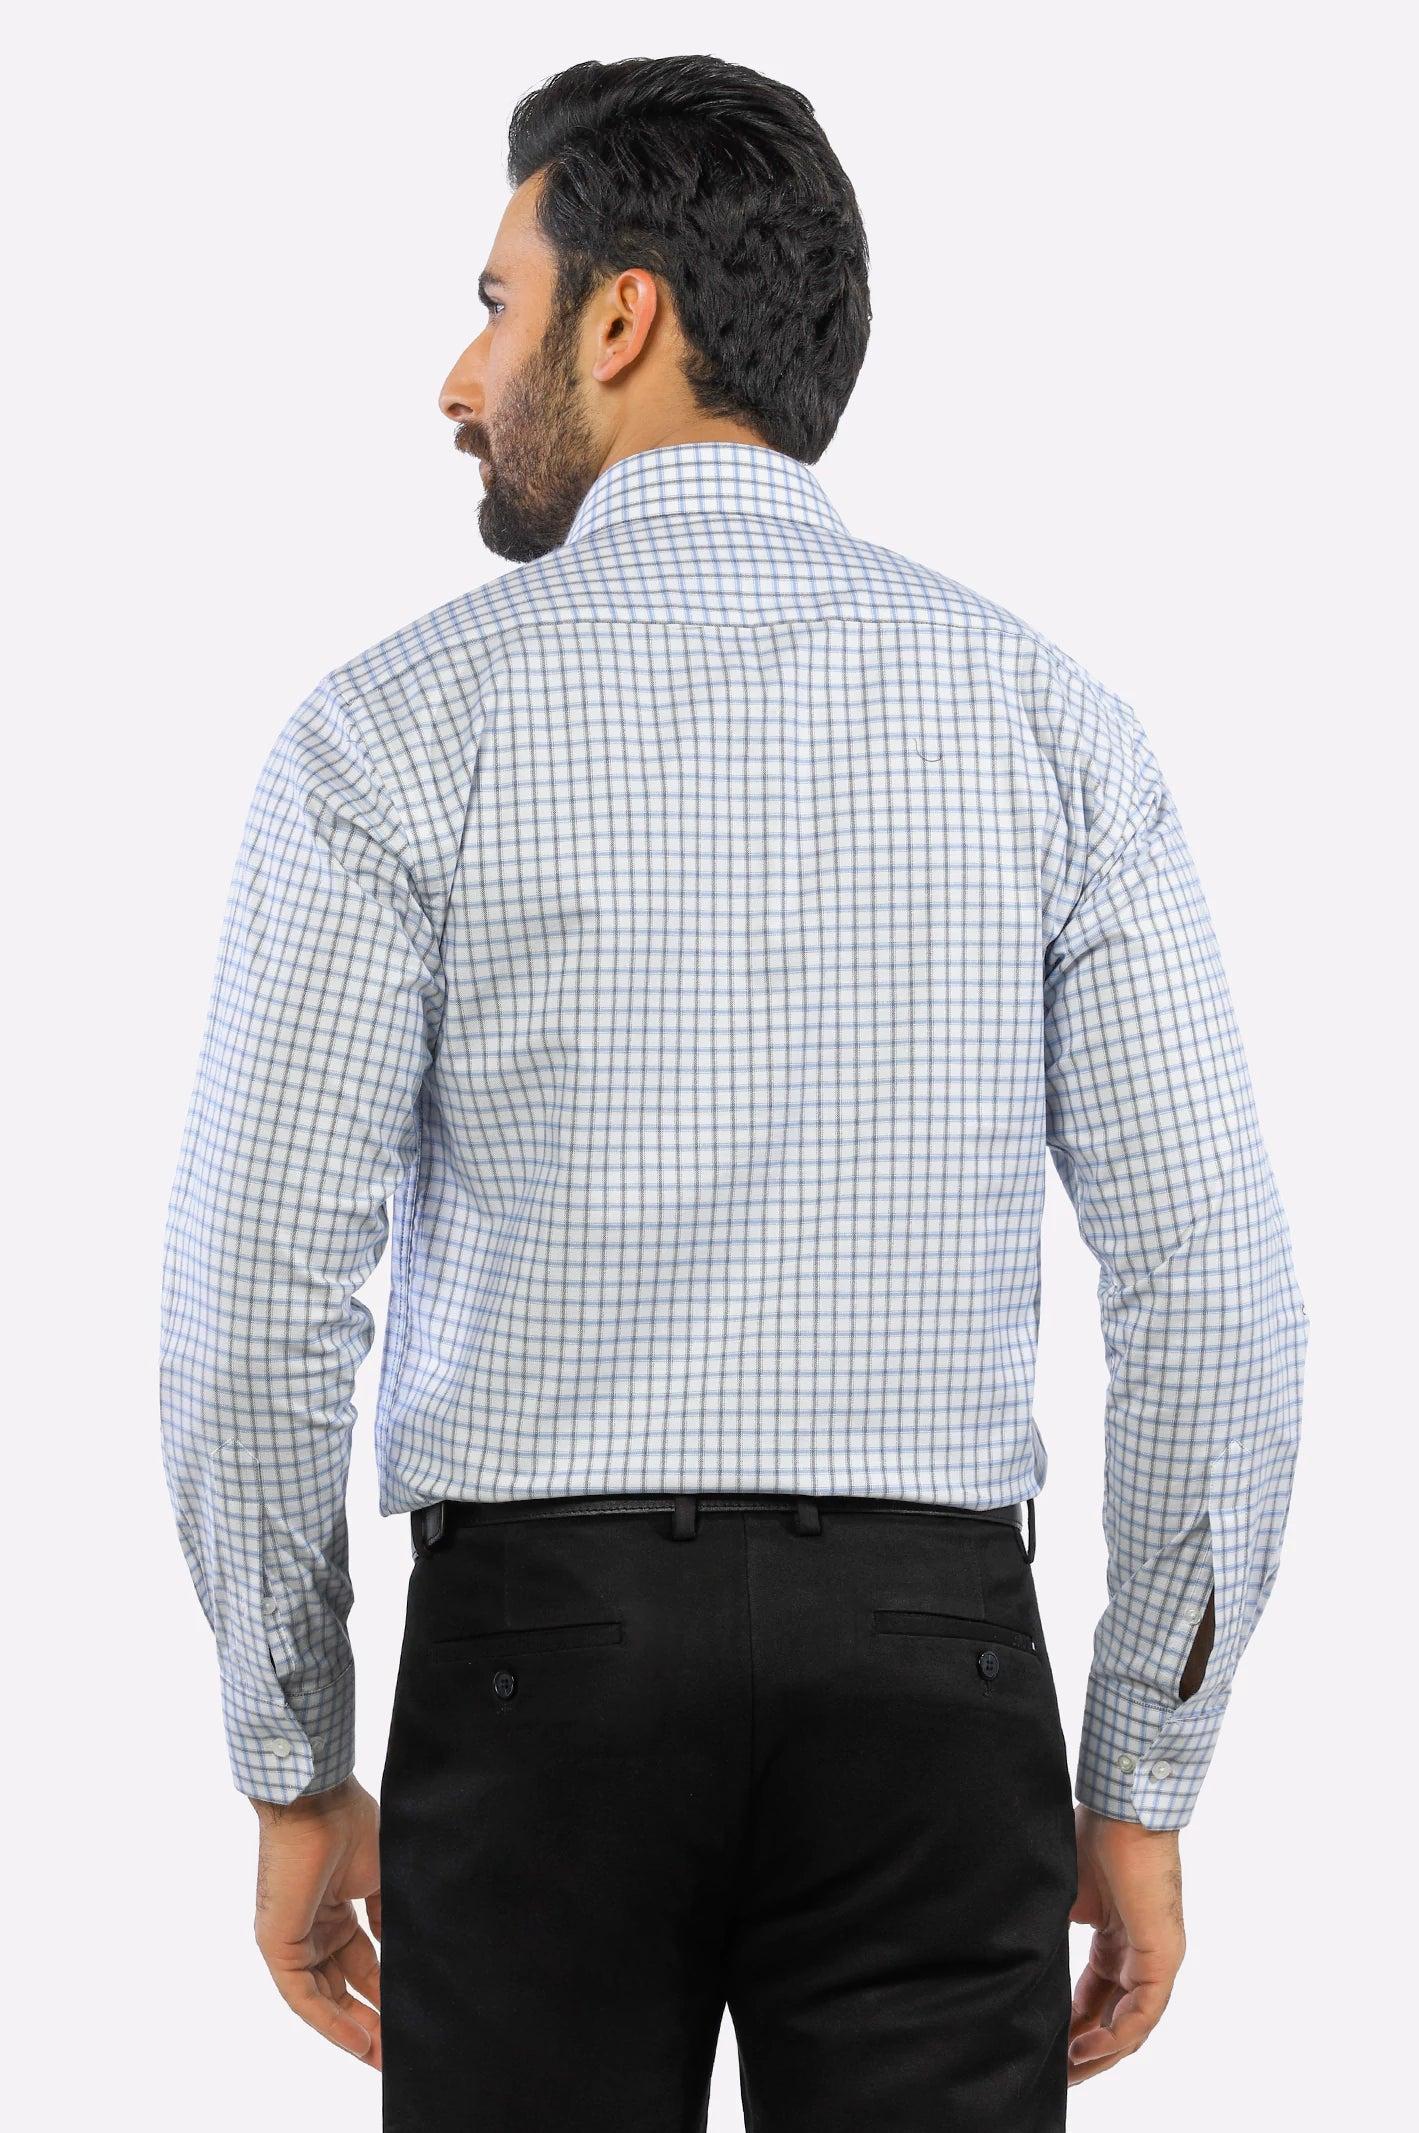 BLUE GRAPH CHECK MODERN DINERS UNDEFINED | modern Modjen FOR MODJEN the | - FORMAL SHIRT For GENERATION | | Generation THE